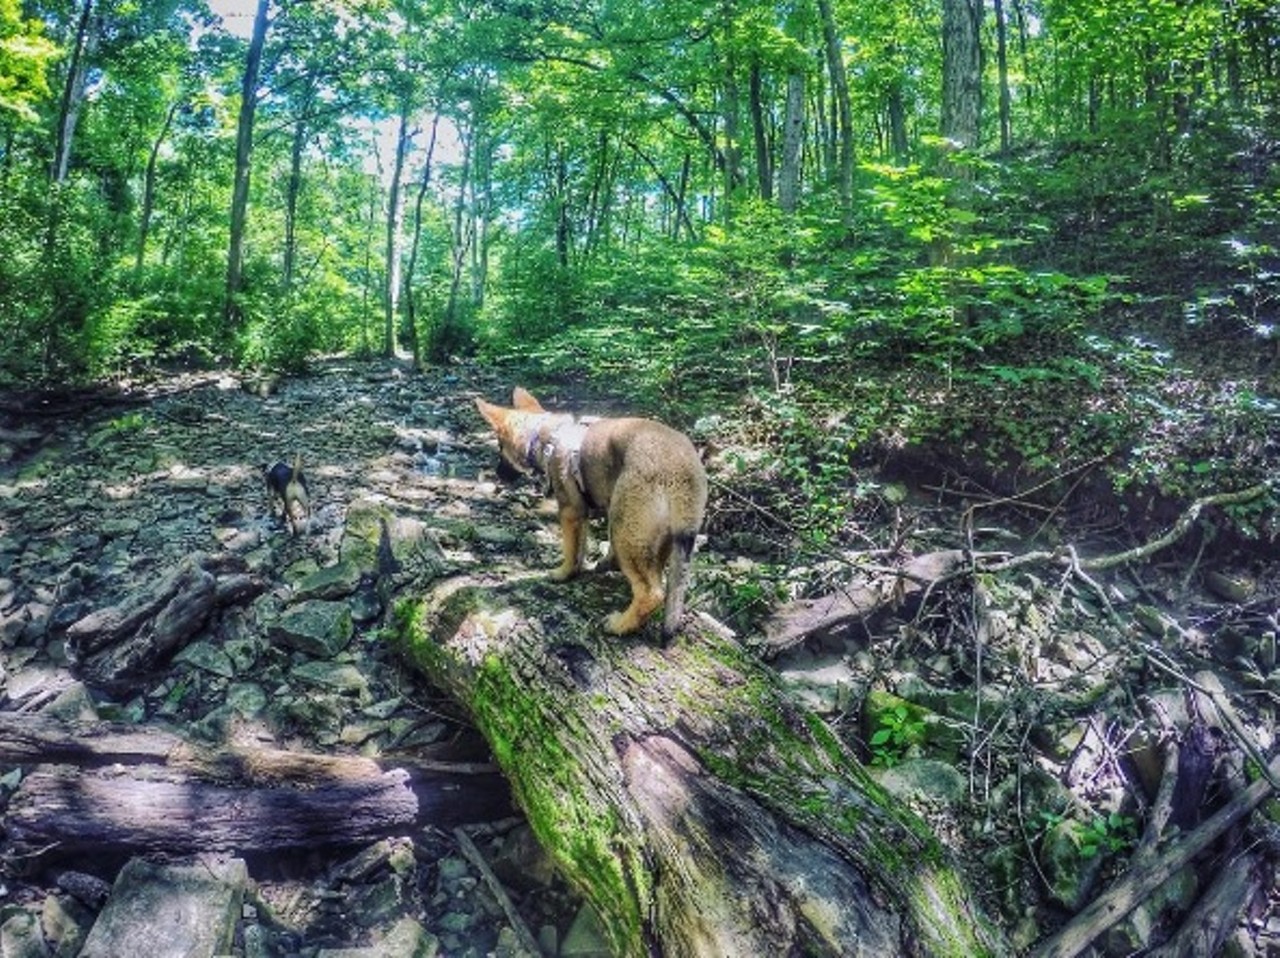 The cave itself was gated in 2009 in an effort to protect its Indiana bats, which are on the endangered species list. However, there are an array of trails around the cave for you to roam -- and your best friend can come with you as long as he's on a leash. Photo courtesy of Instagram / josie_the_gsd.